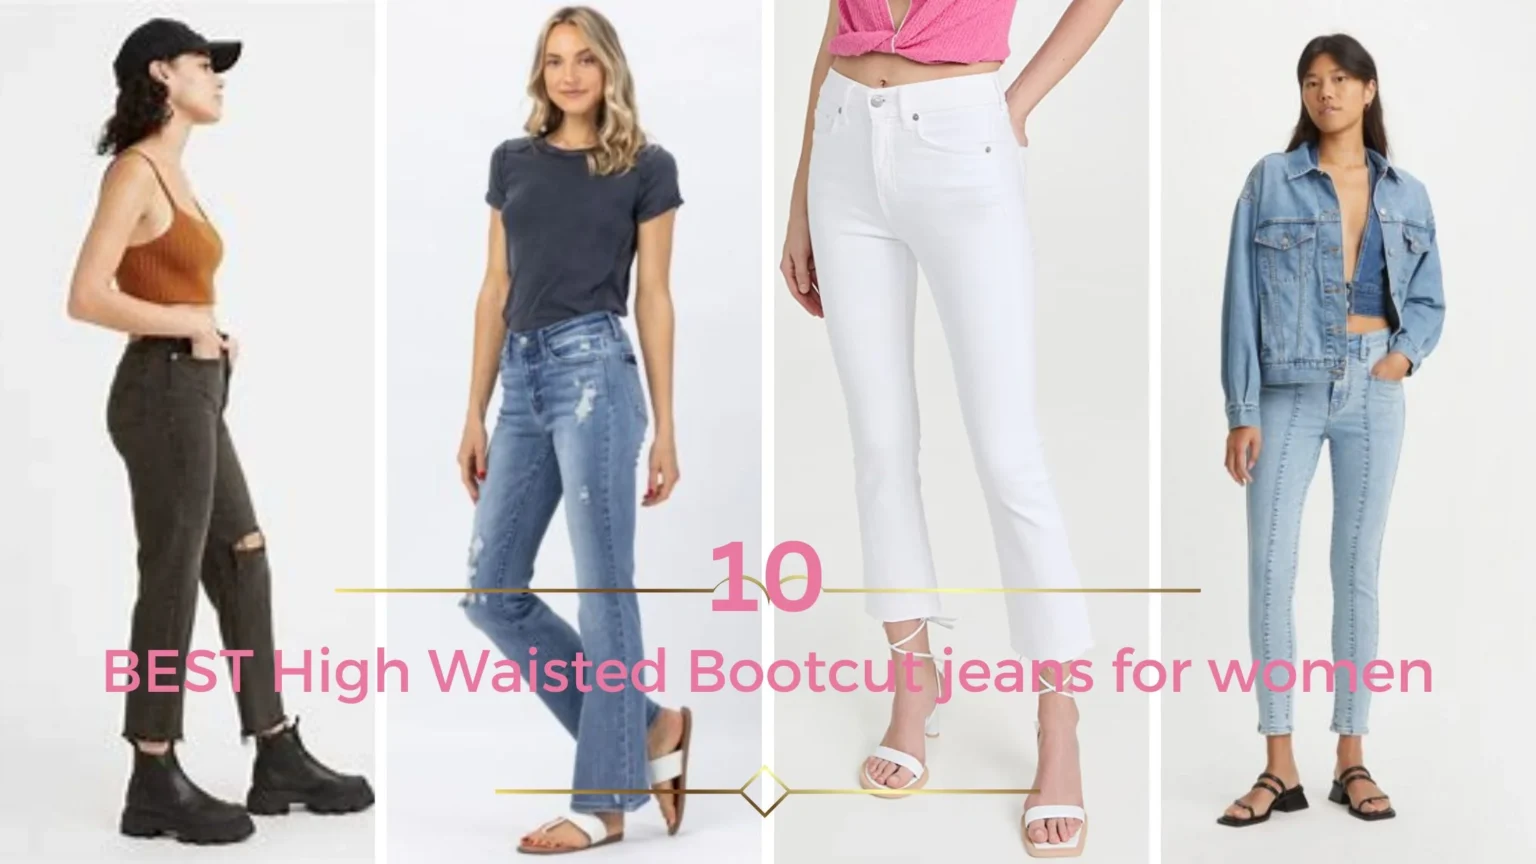 Best High Waisted Bootcut jeans for women